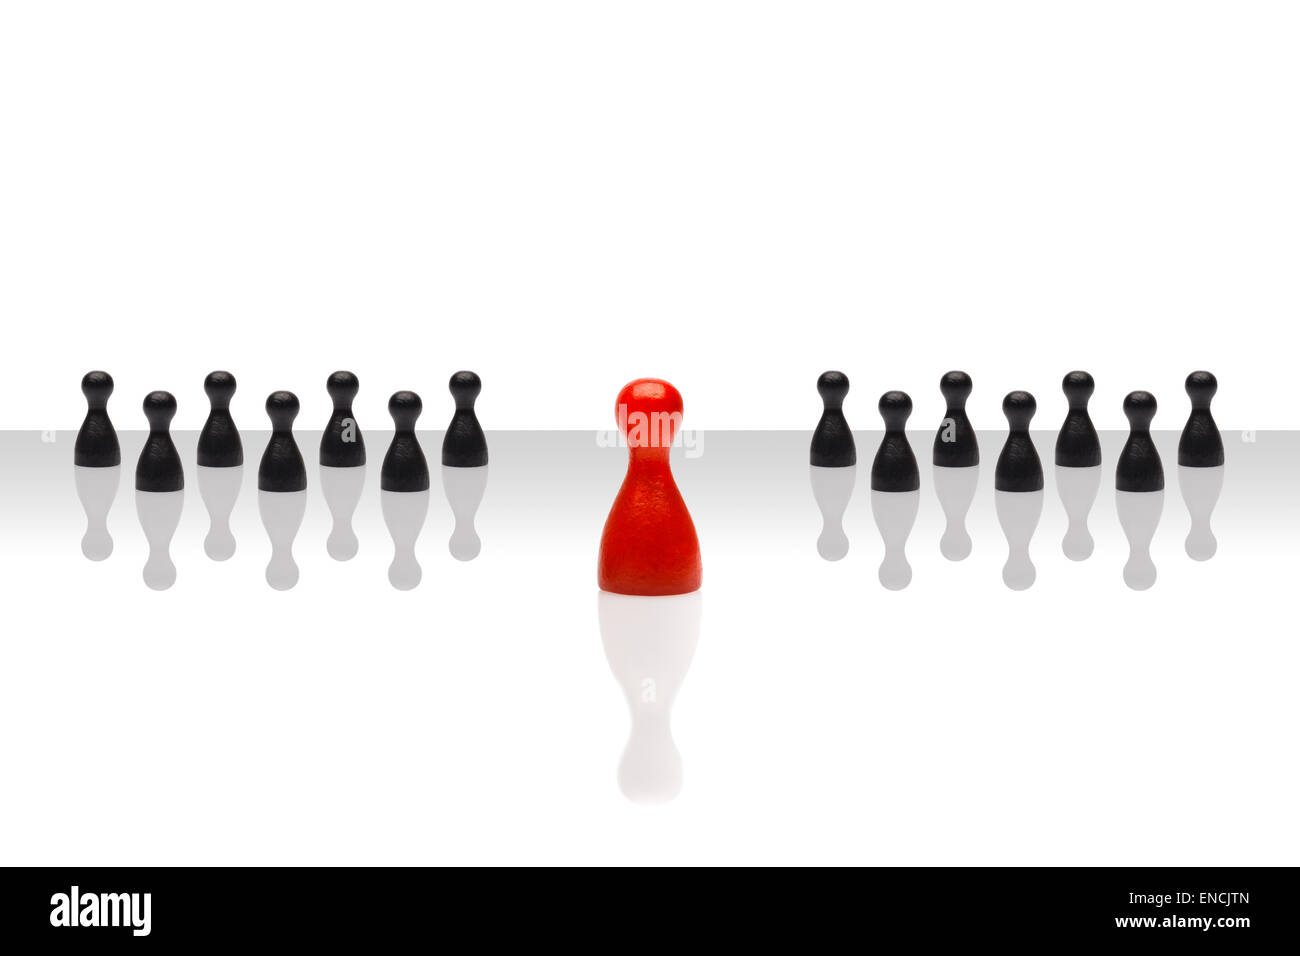 Business concept for leader team, leadership, step forward. Line grouped small black pawn figures, one red in front, gradient su Stock Photo